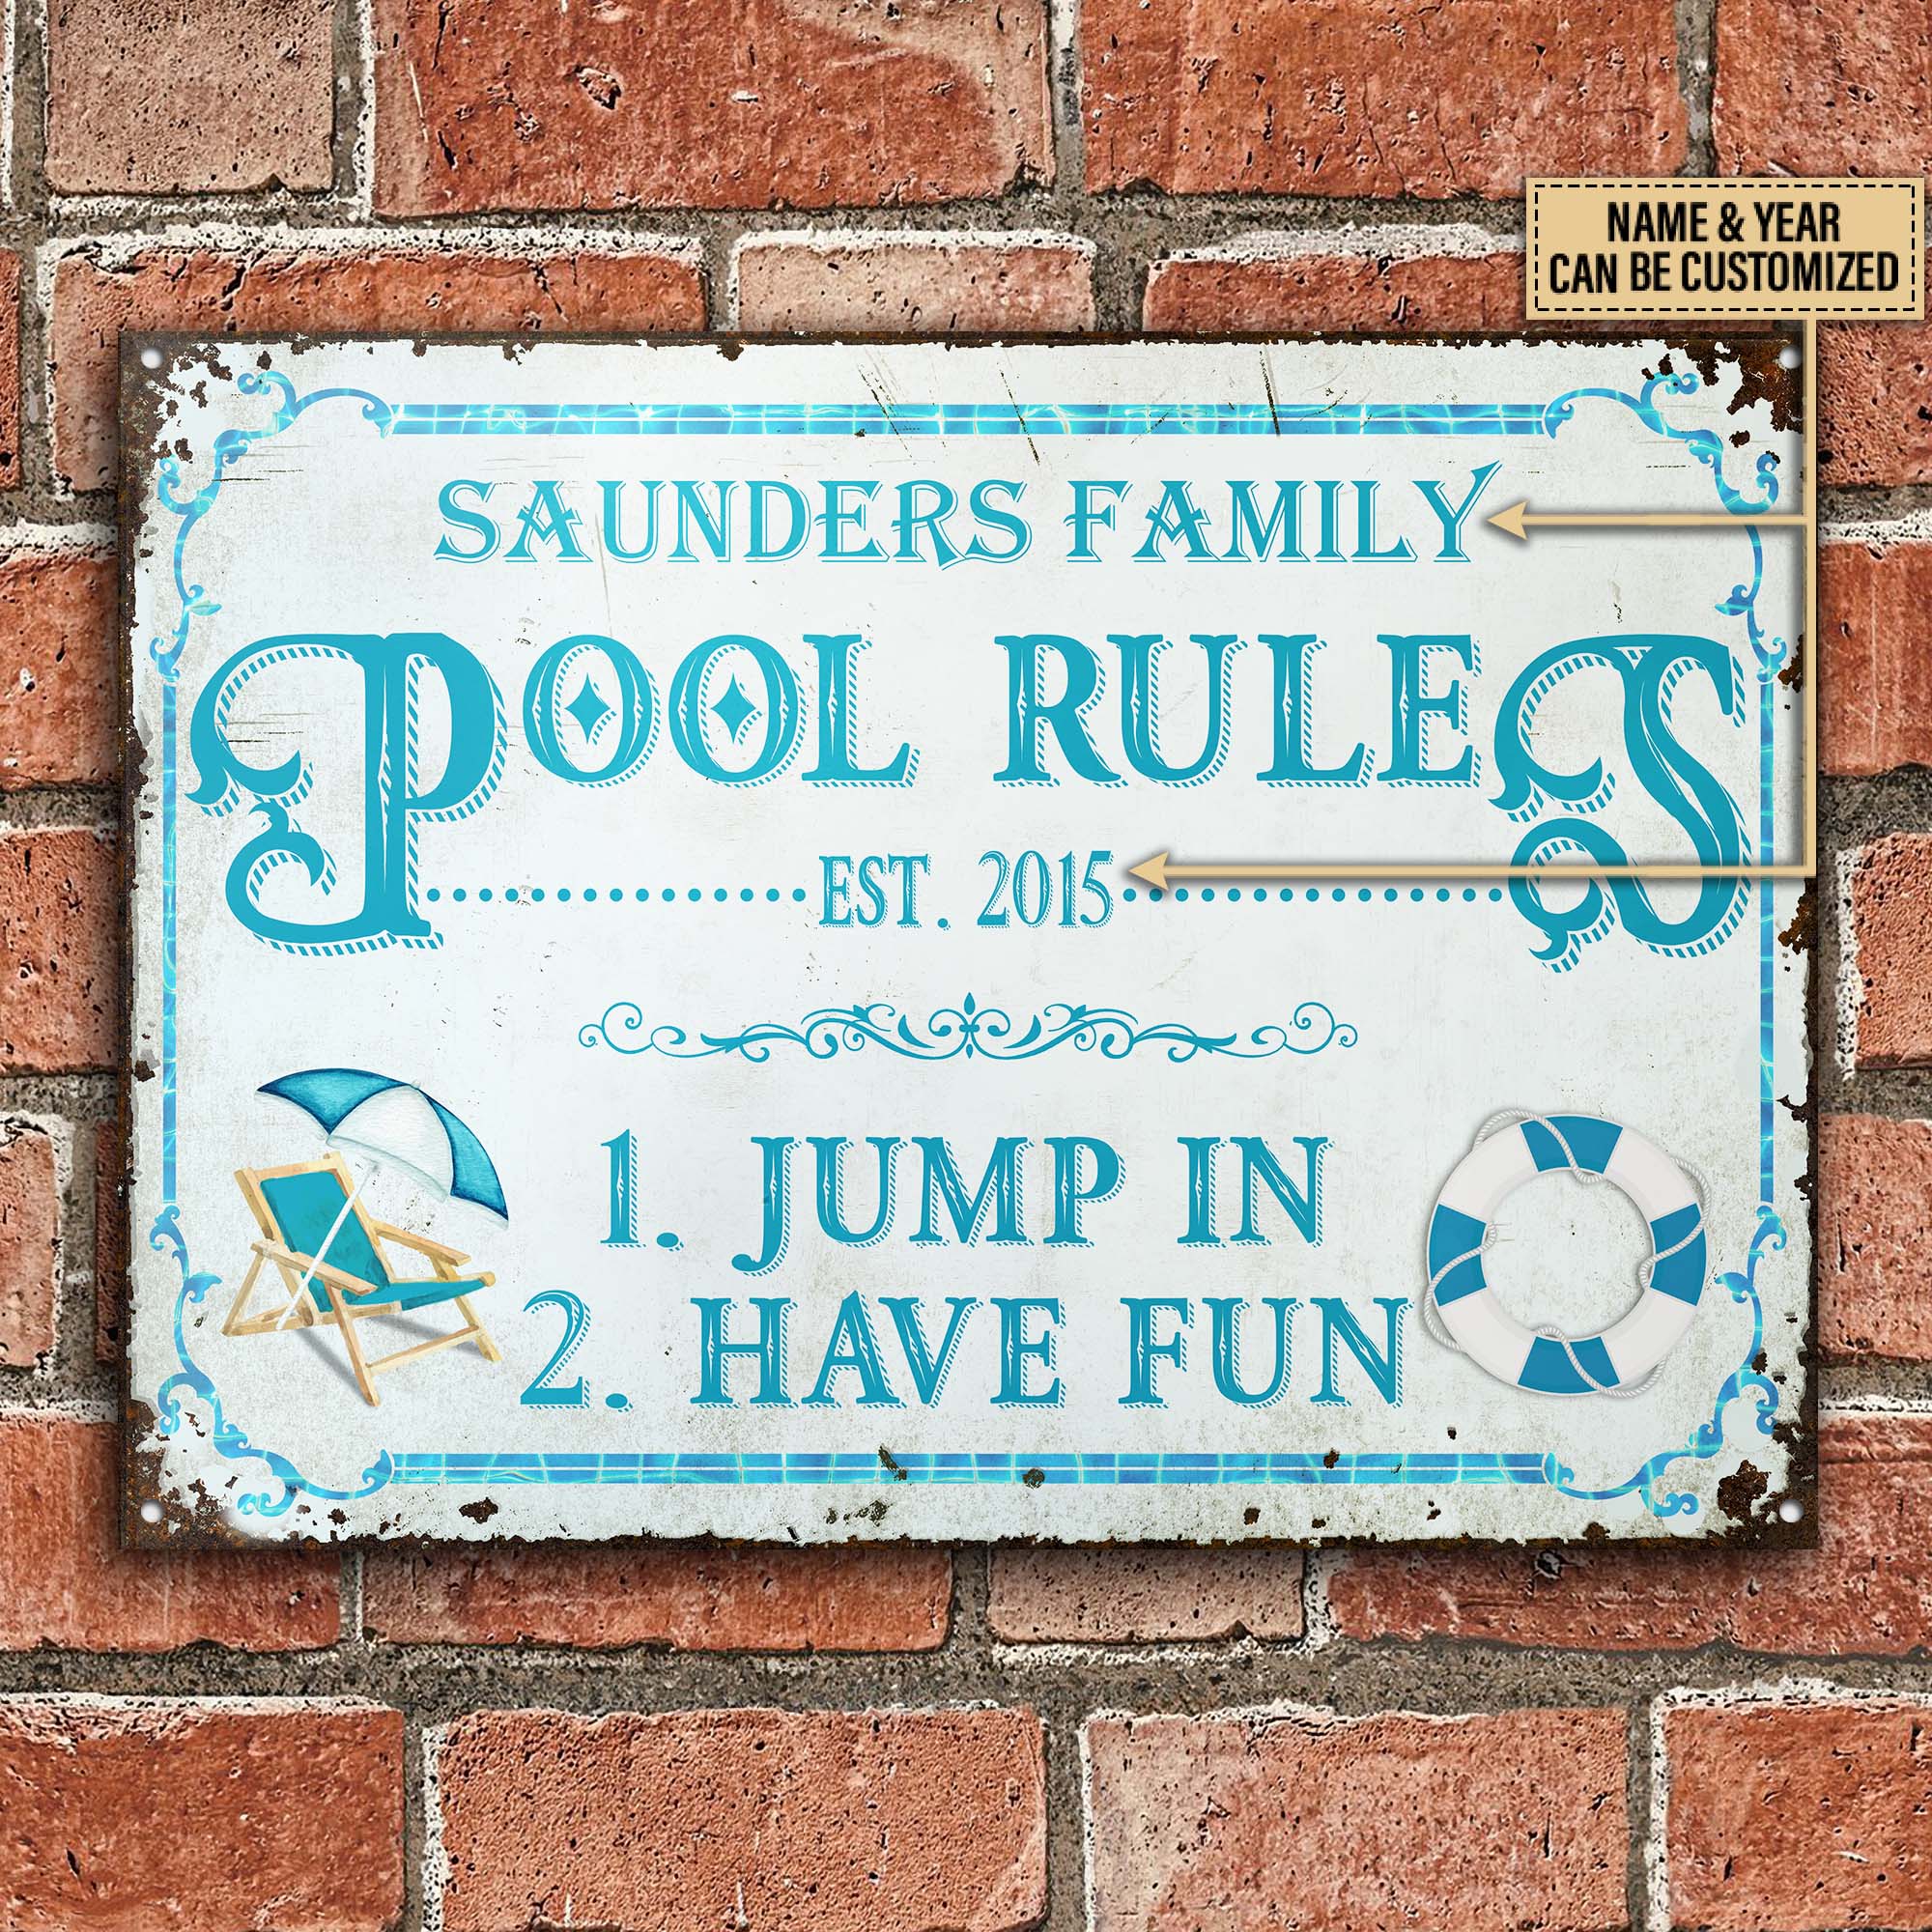 Personalized Metal Sign Swimming Pool Rules Jump In Have Fun CTM One Size 24x18 inch (60.96x45.72 cm) Custom - Printyourwear